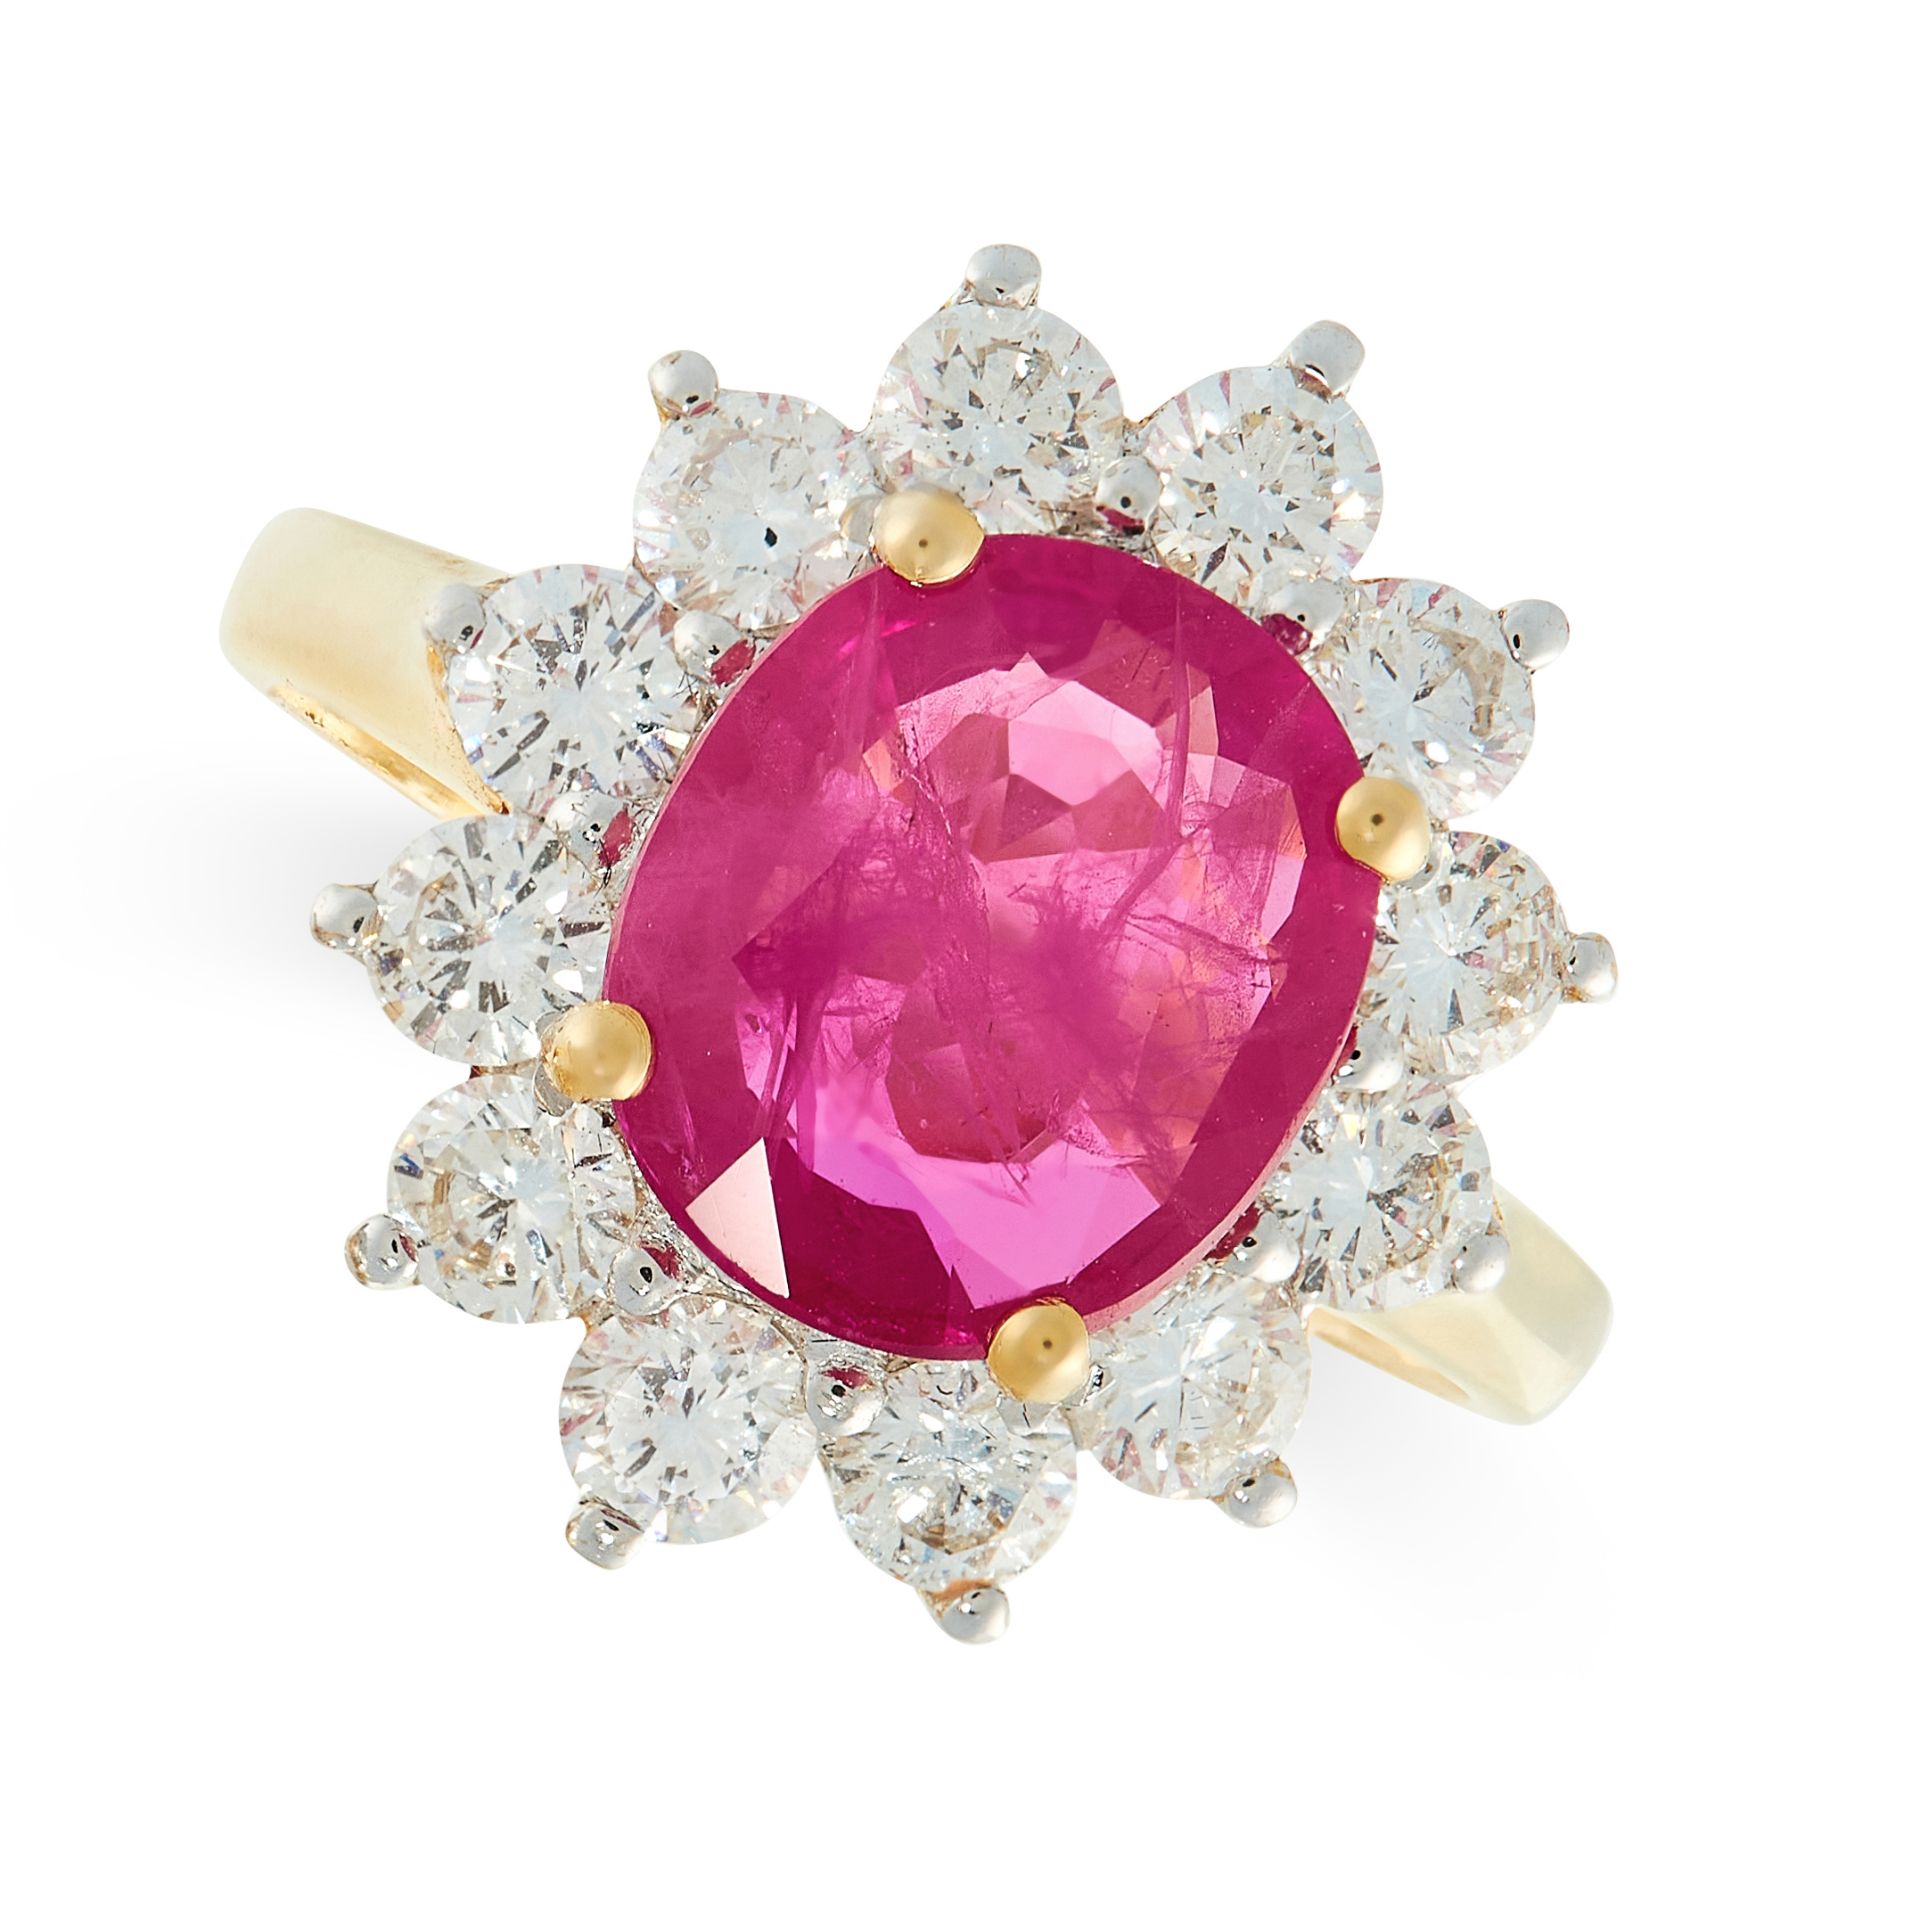 A RUBY AND DIAMOND DRESS RING in 18ct yellow gold, set with a cushion cut ruby of 2.85 carats,